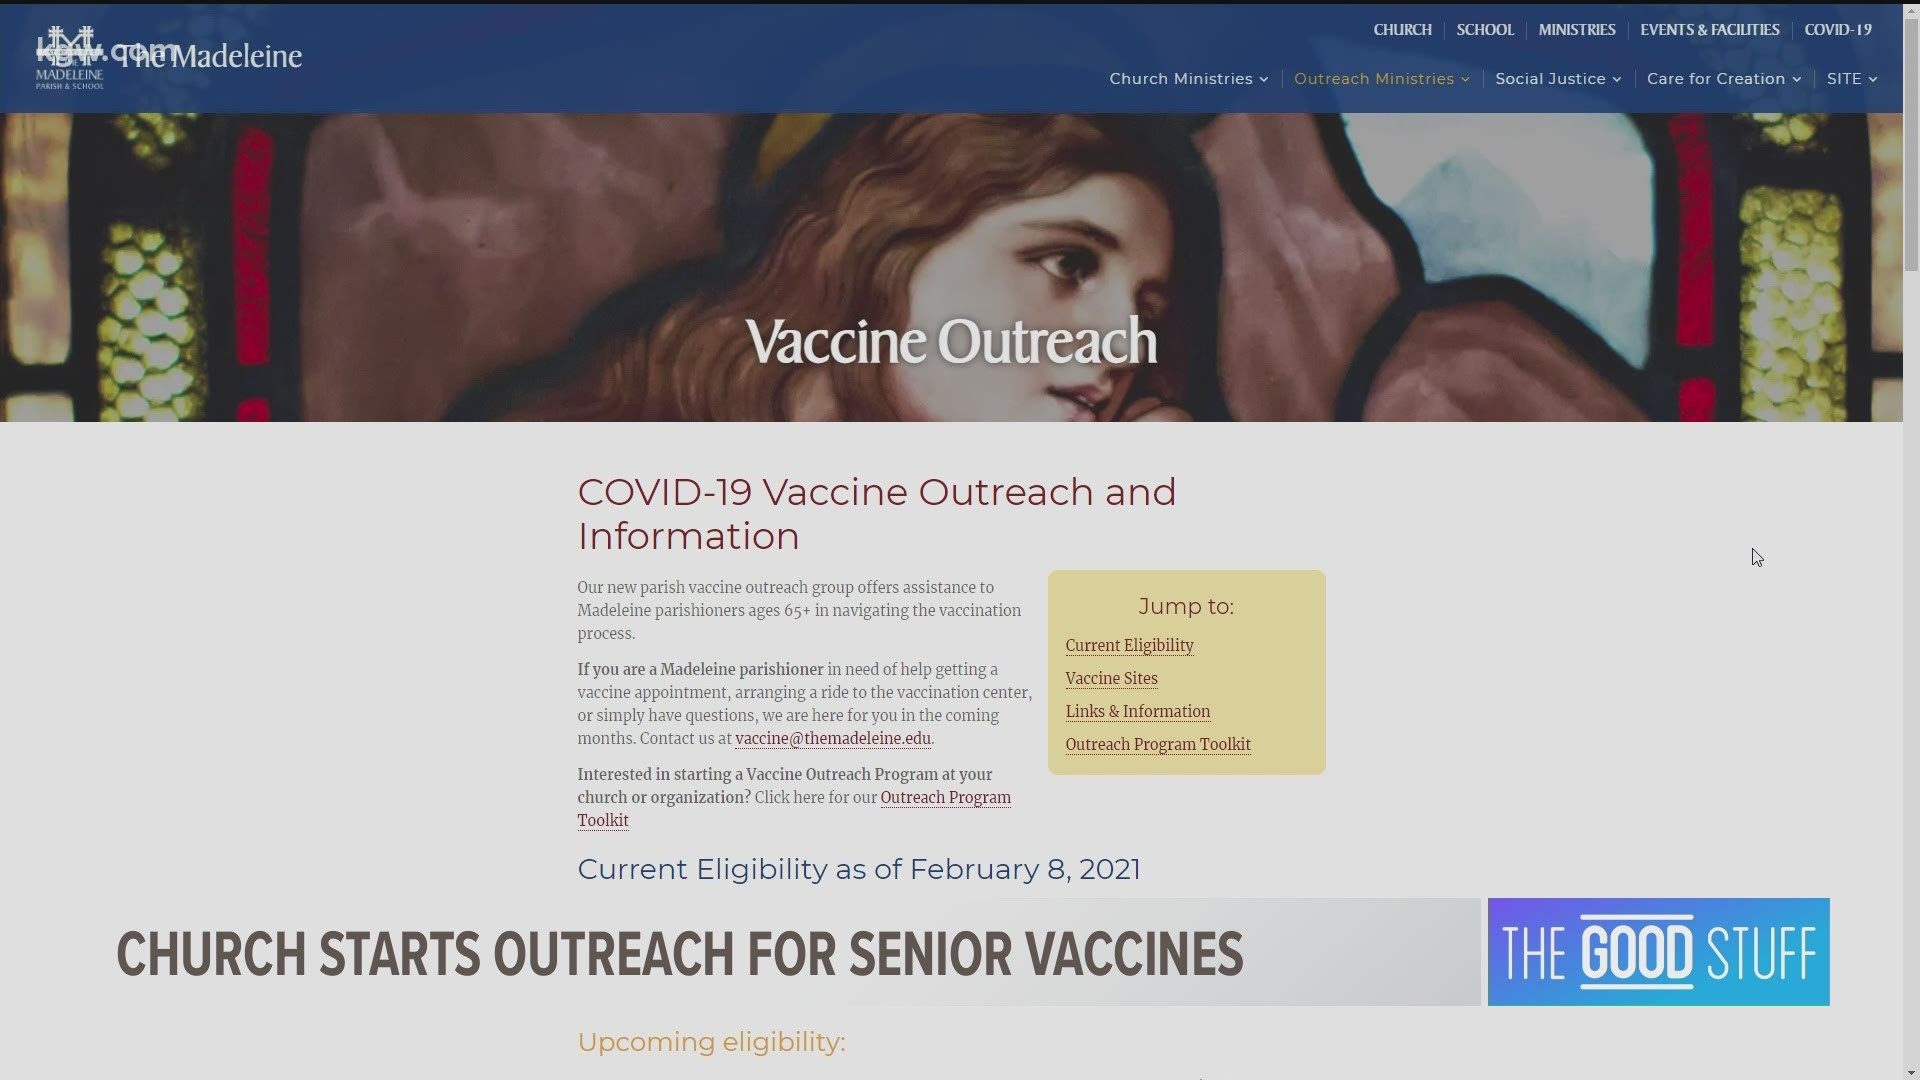 The Madeleine Parish wants to give seniors a source of vaccine information they can trust.